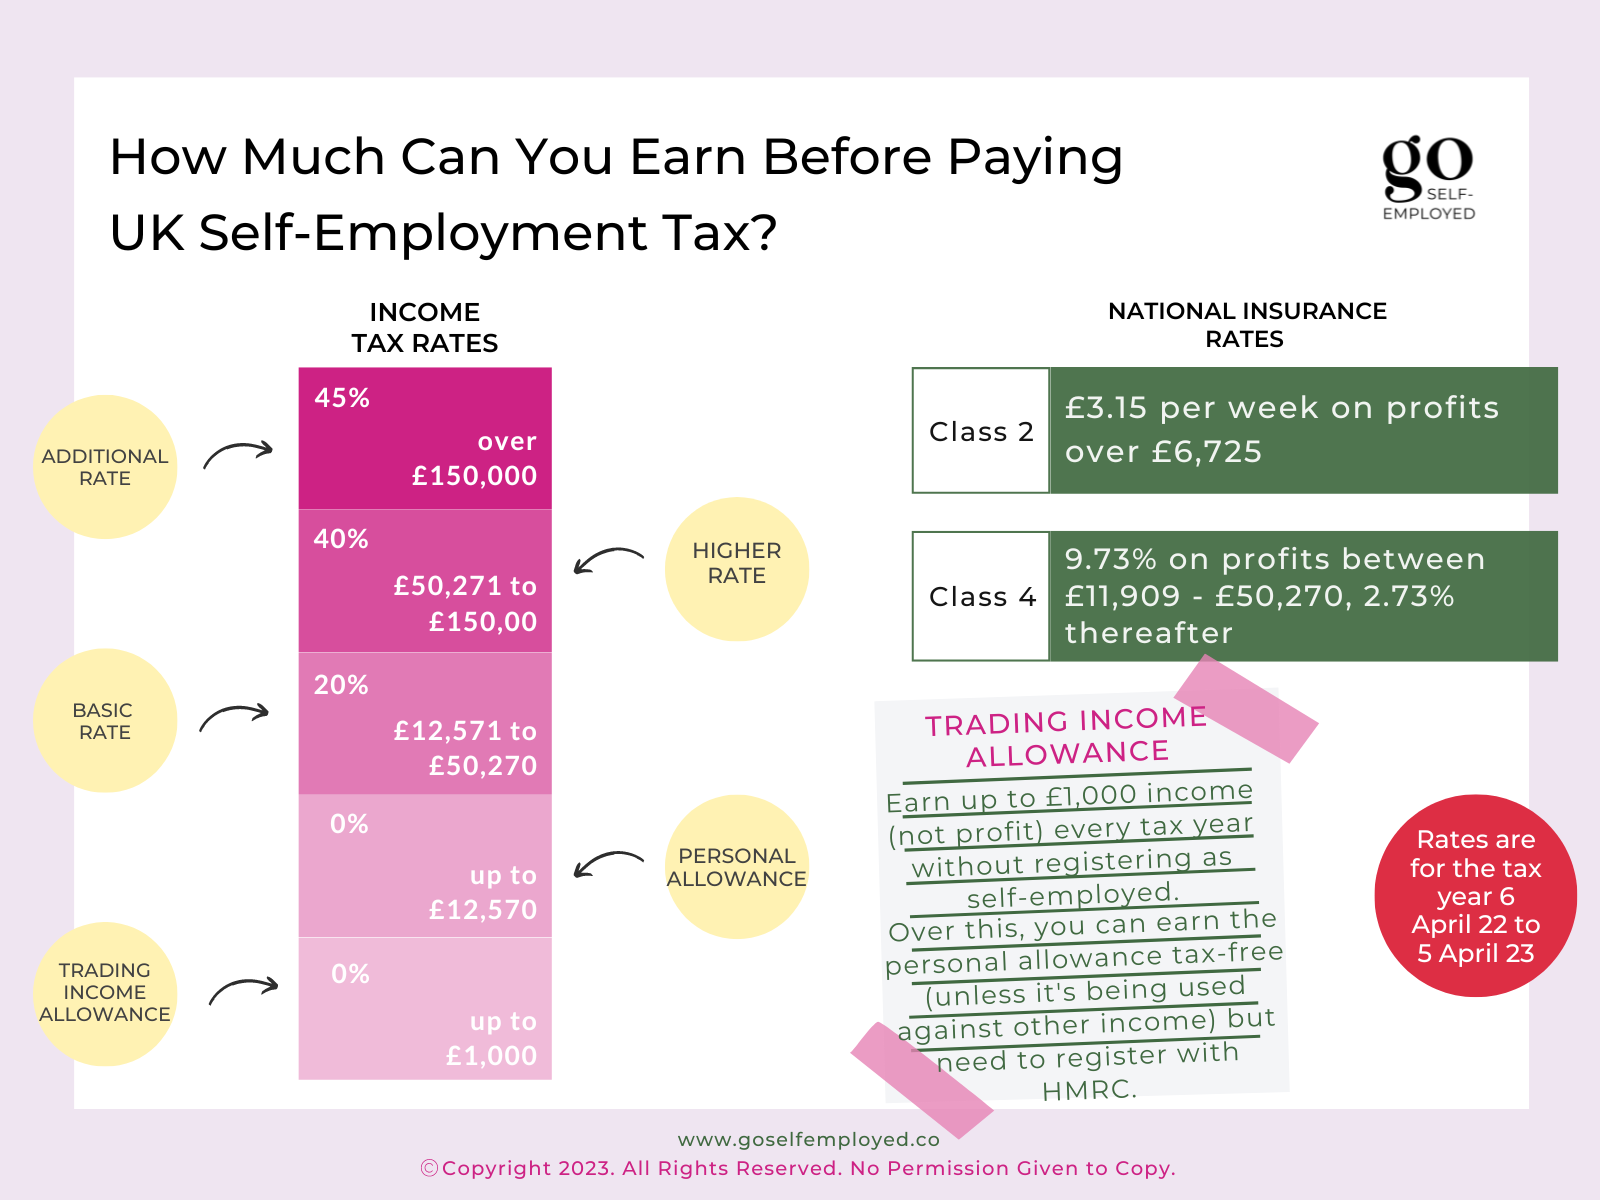 how much can you earn before paying self-employed tax?